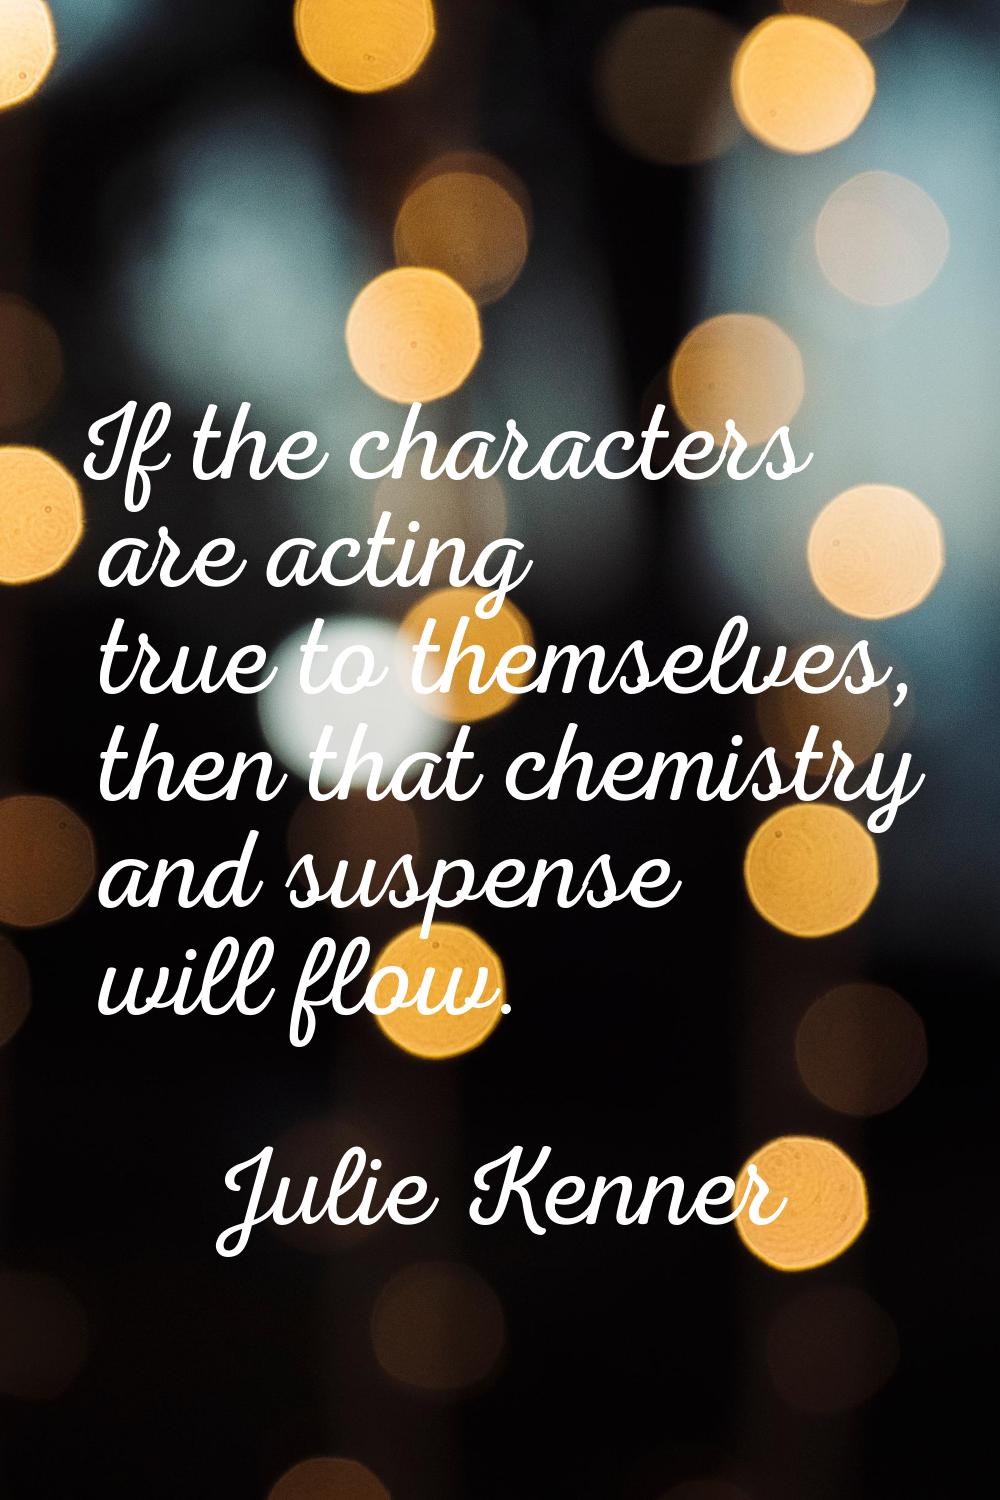 If the characters are acting true to themselves, then that chemistry and suspense will flow.